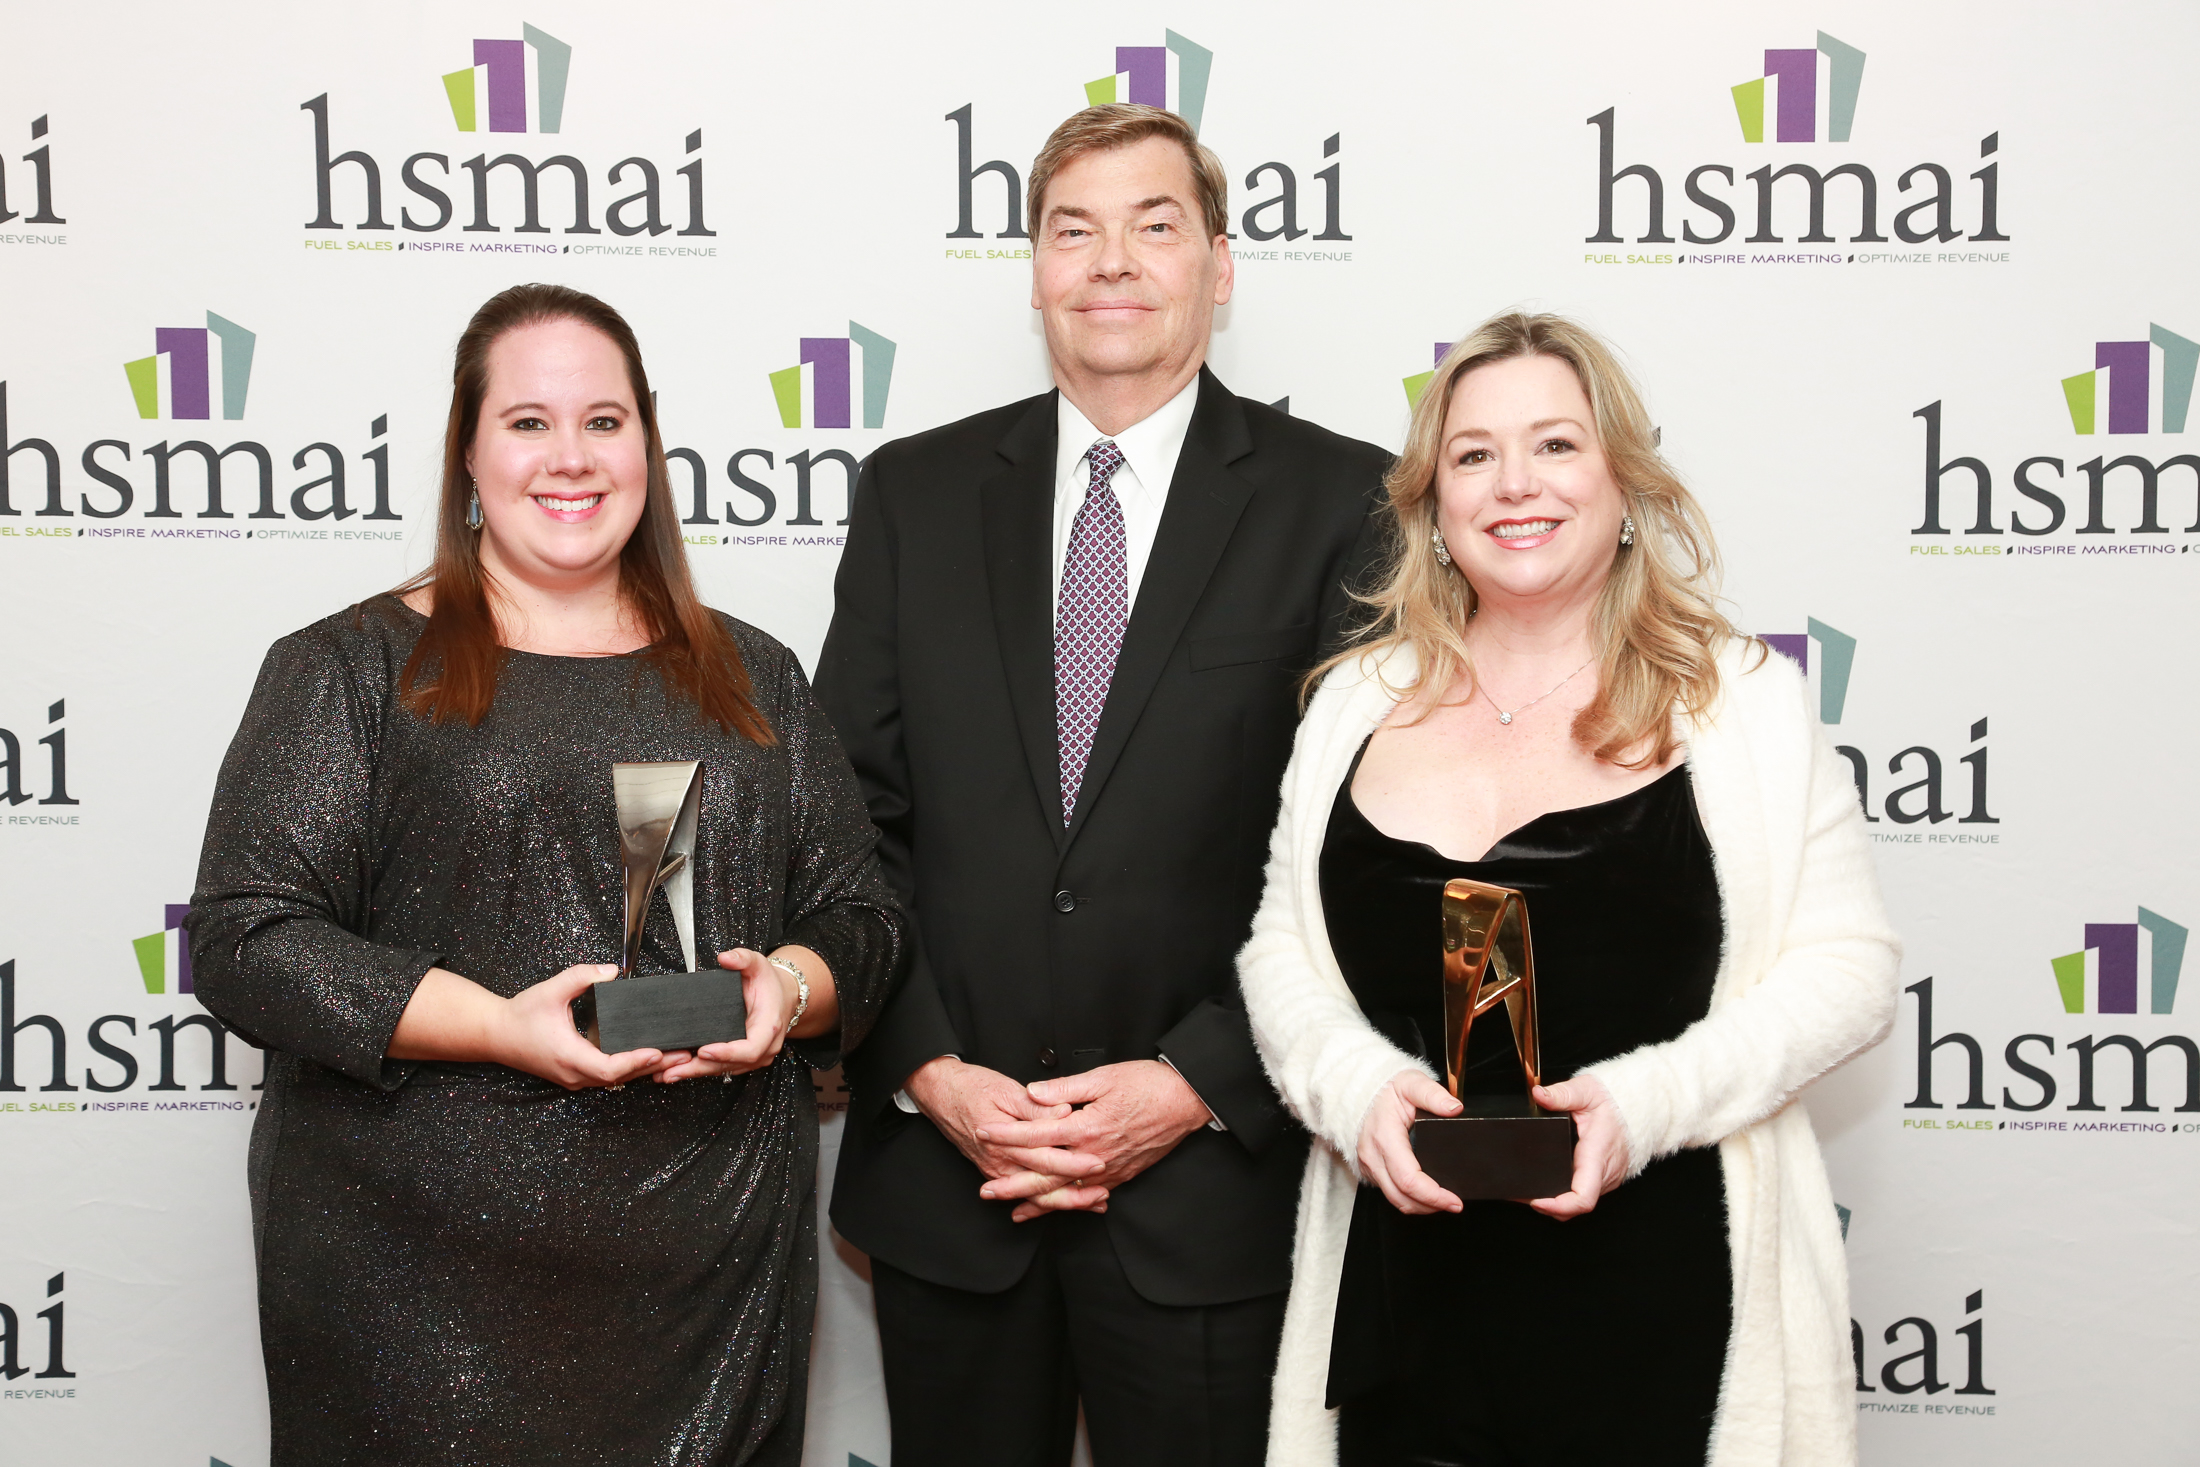 HSMAI Visit Plano team with awards